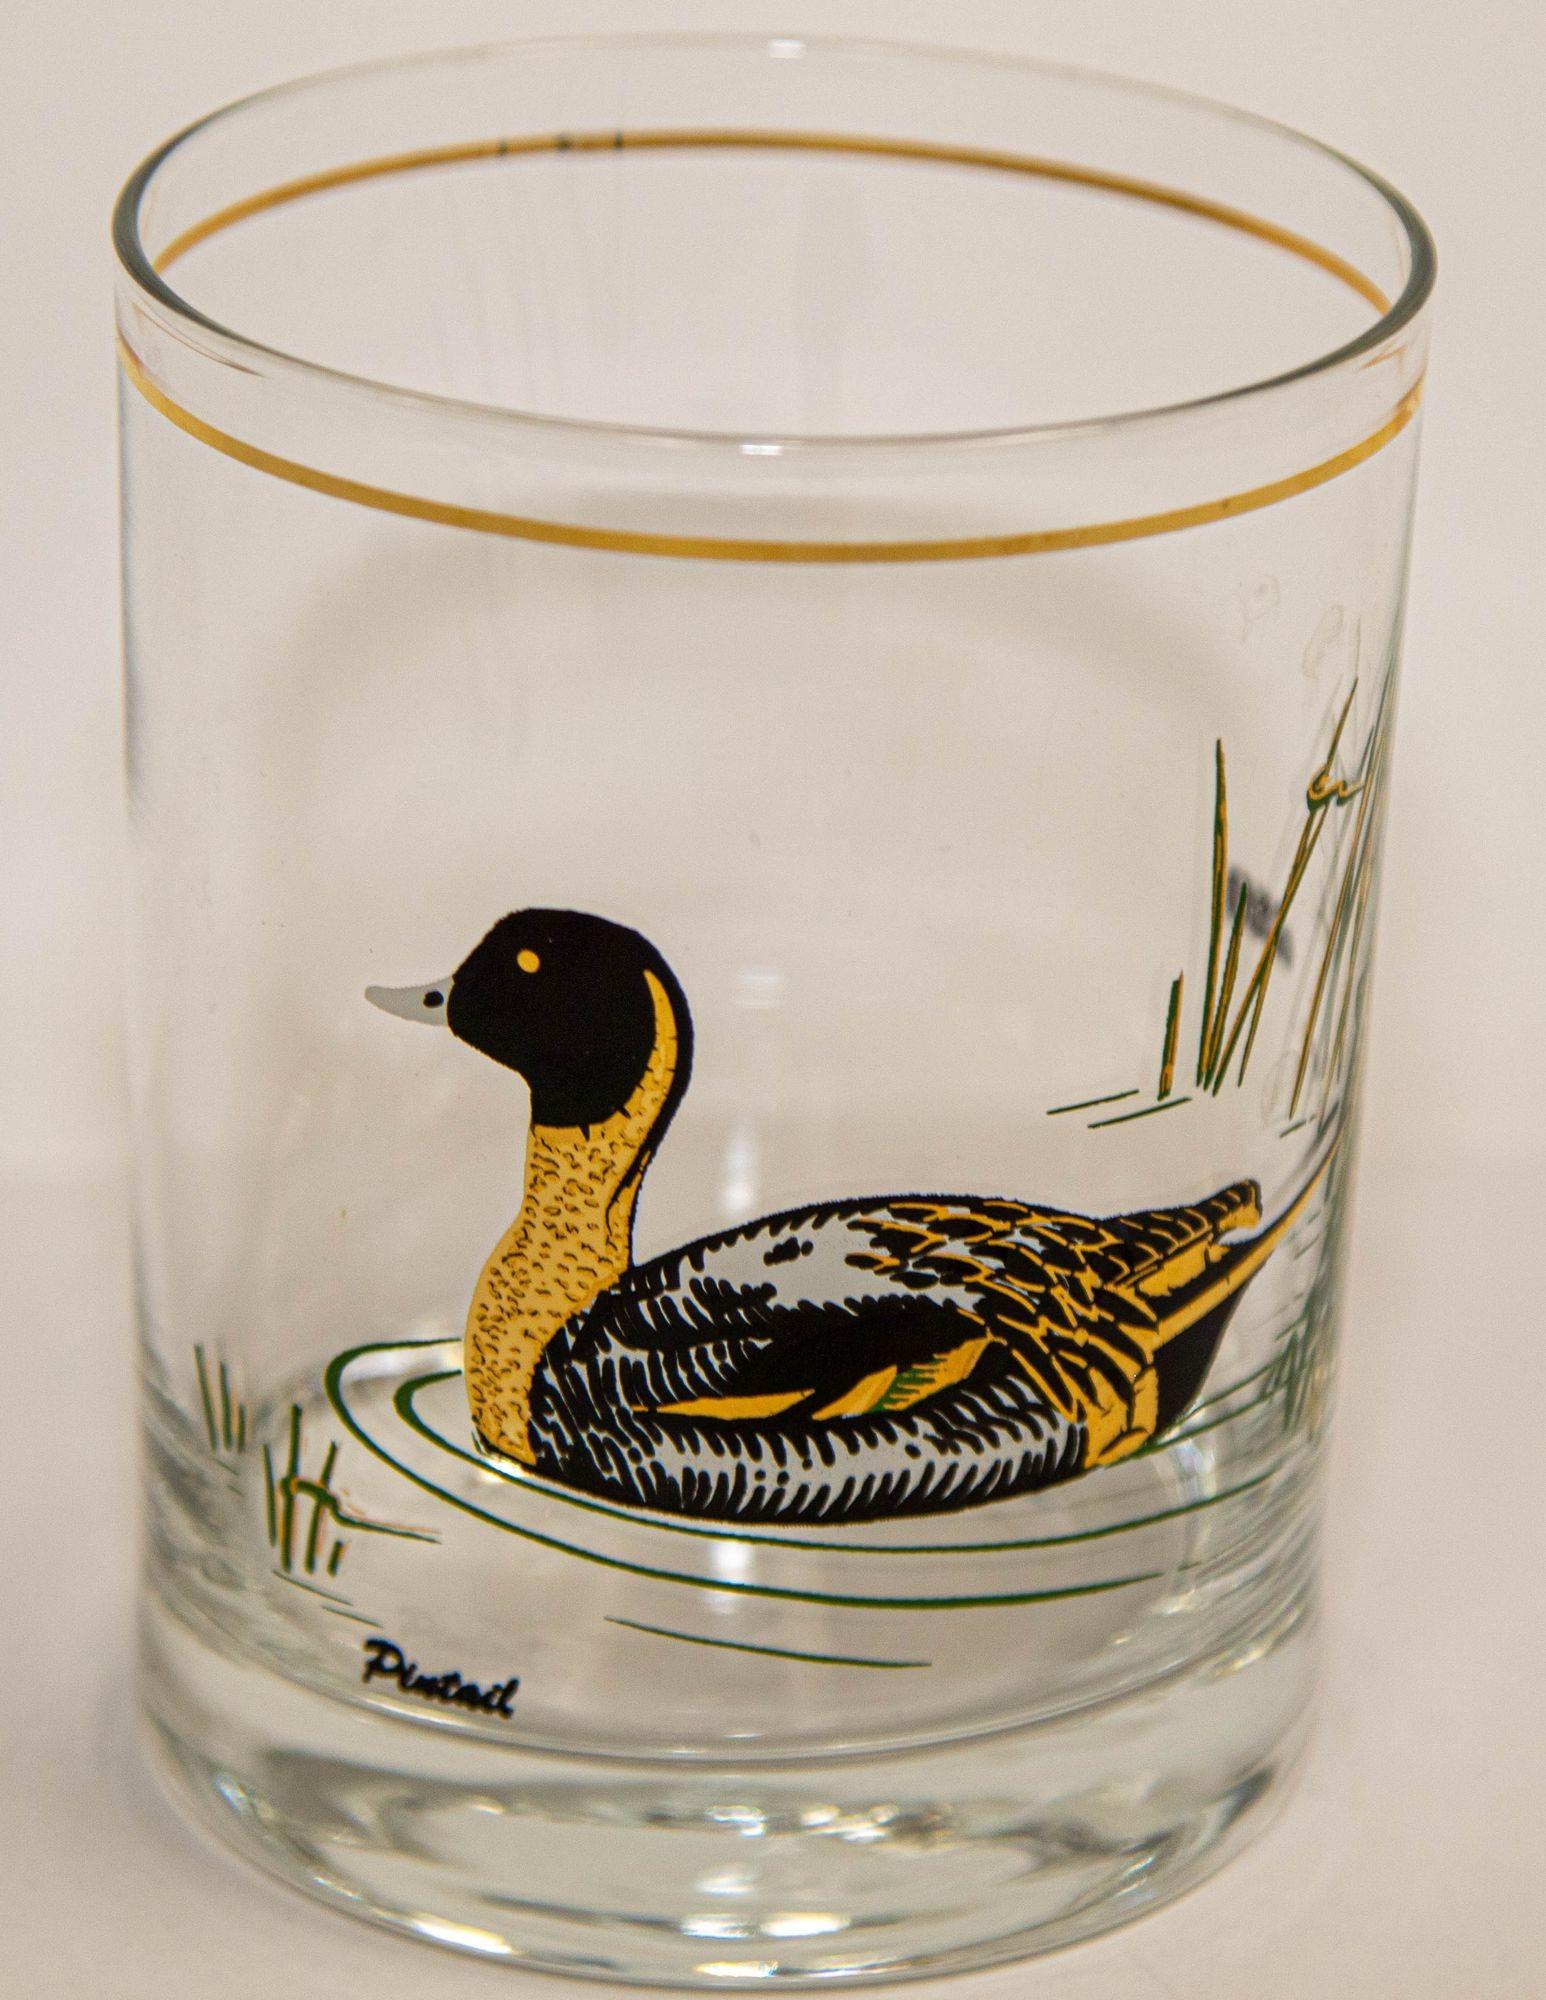 Vintage Culver Duck Barware Glassware Double Old Fashioned, Whiskey, Cocktail Glasses.
Culver bar glasses, whisky Cocktail replacement glass signed @Culver, collectible with gold rim.
Vintage 1960s or 1970s Culver lowball drinking glasses with